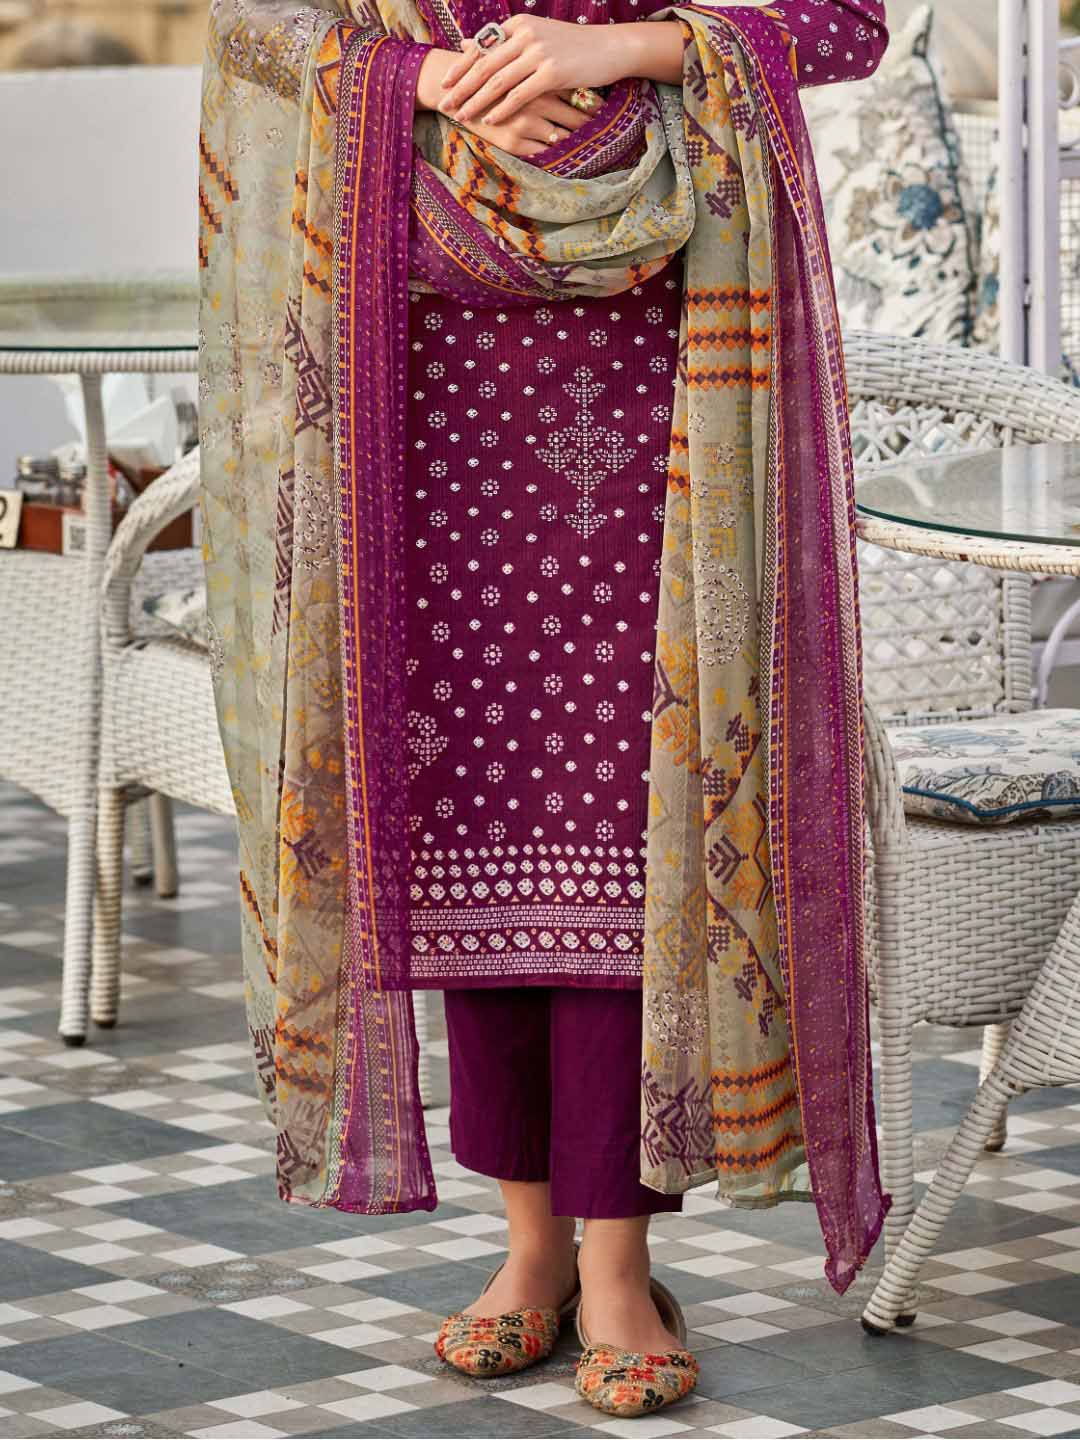 Unstitched Printed Cotton Salwar Suit Dress Material for Women